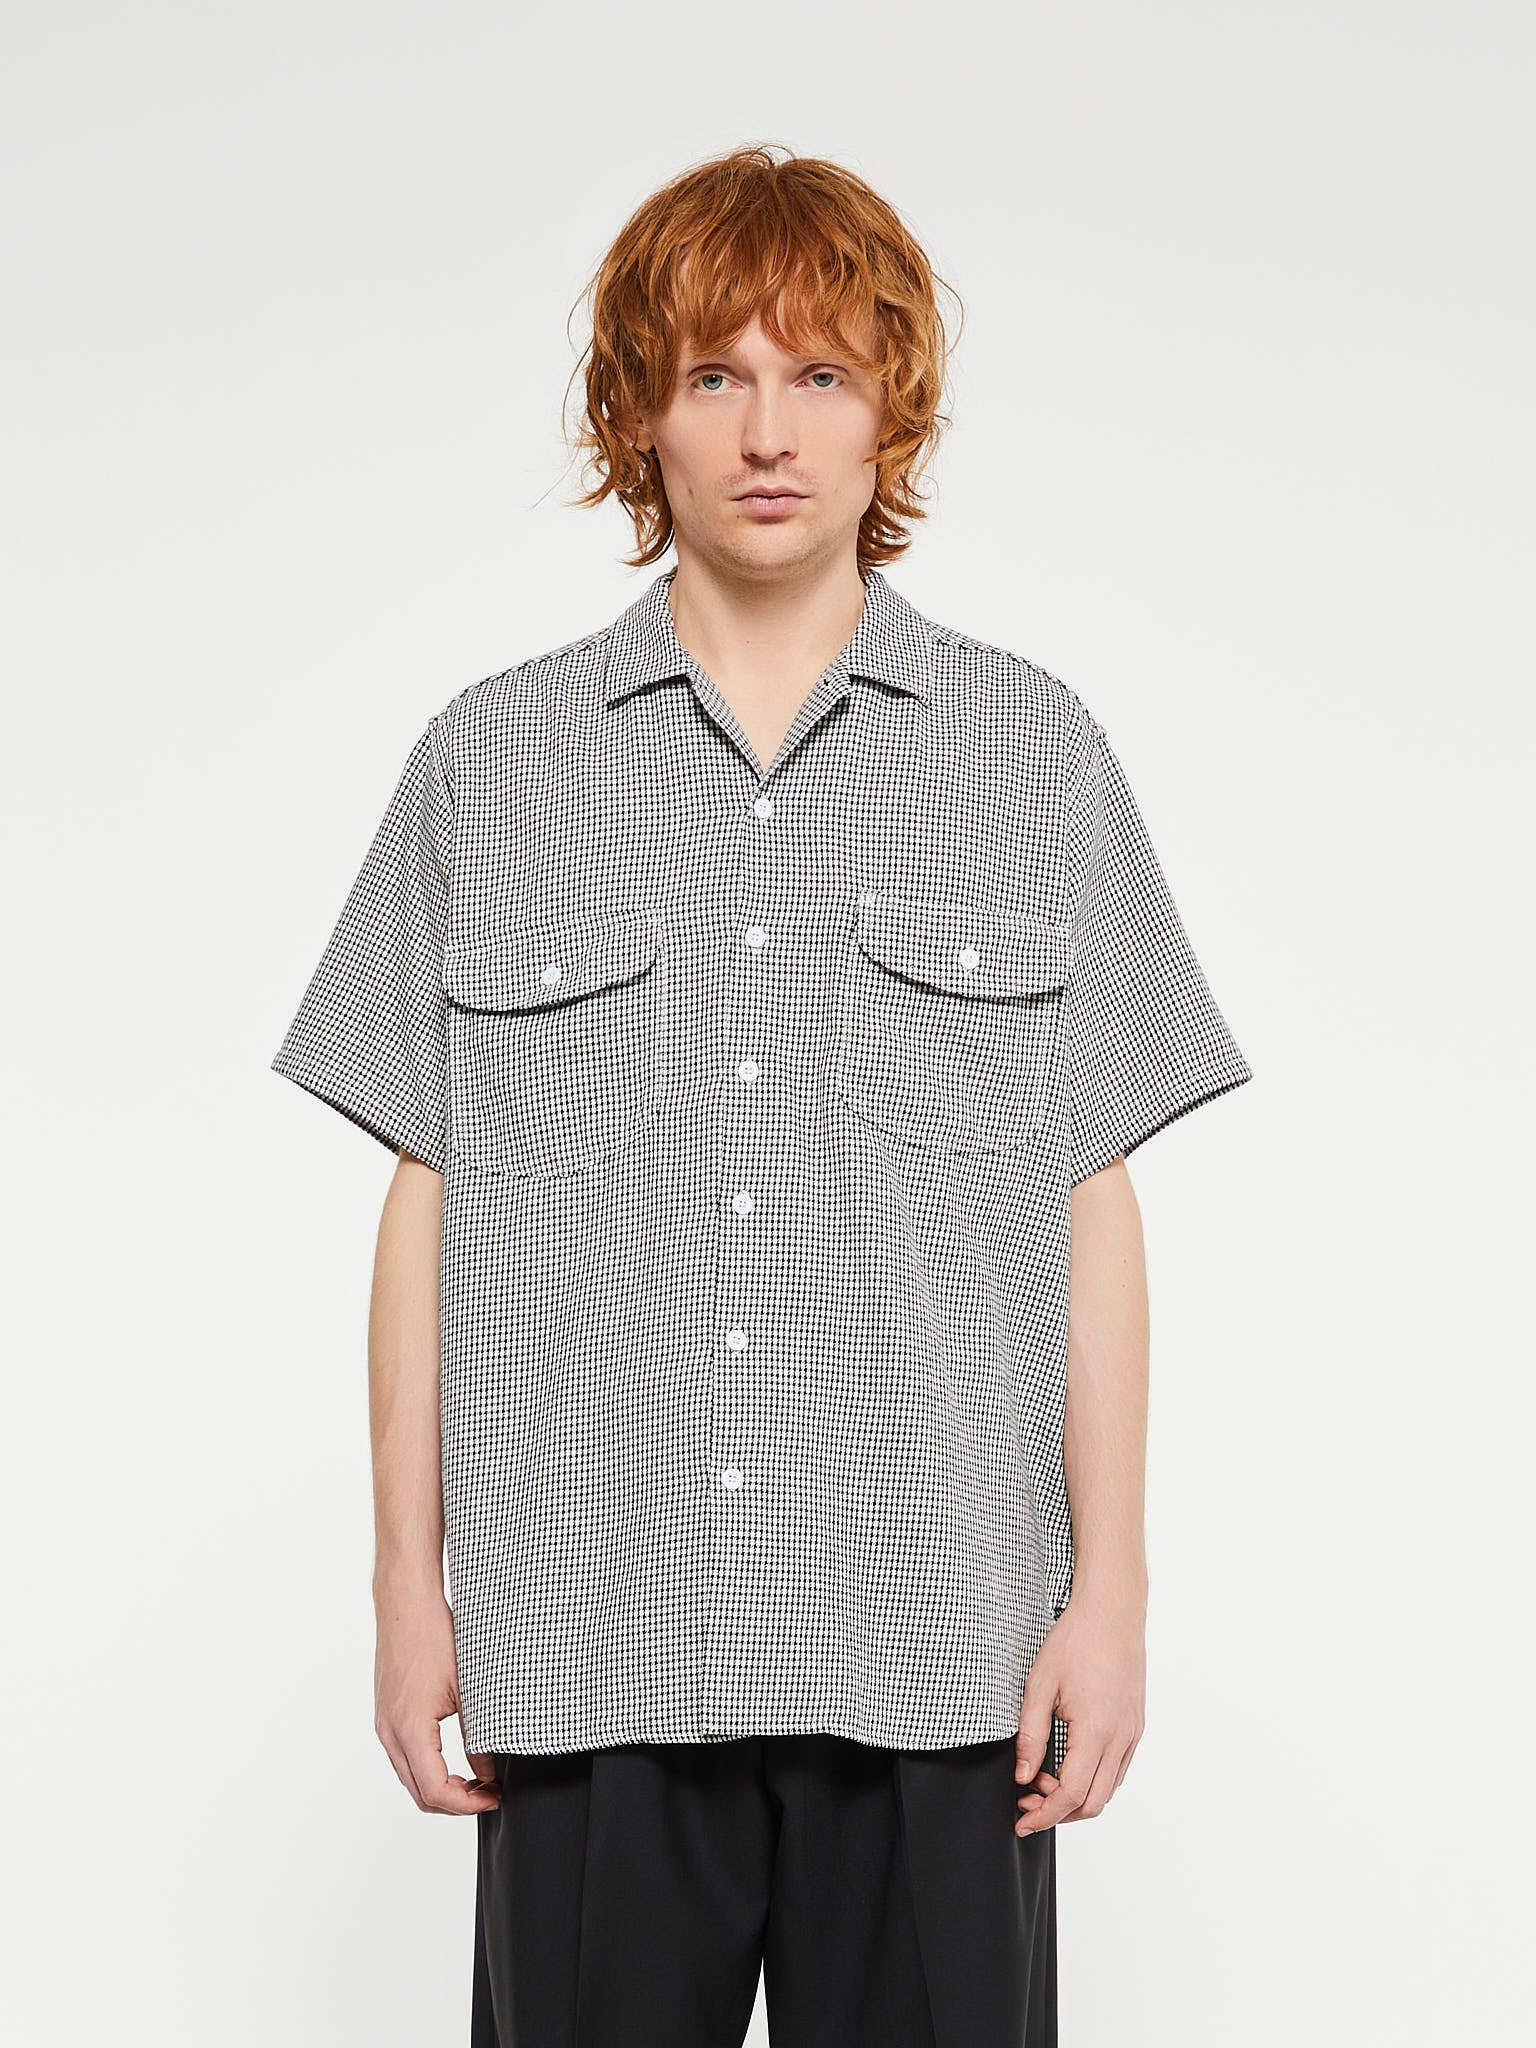  Beams Plus - Work Classic FitHounds Tooth Shirt in Black